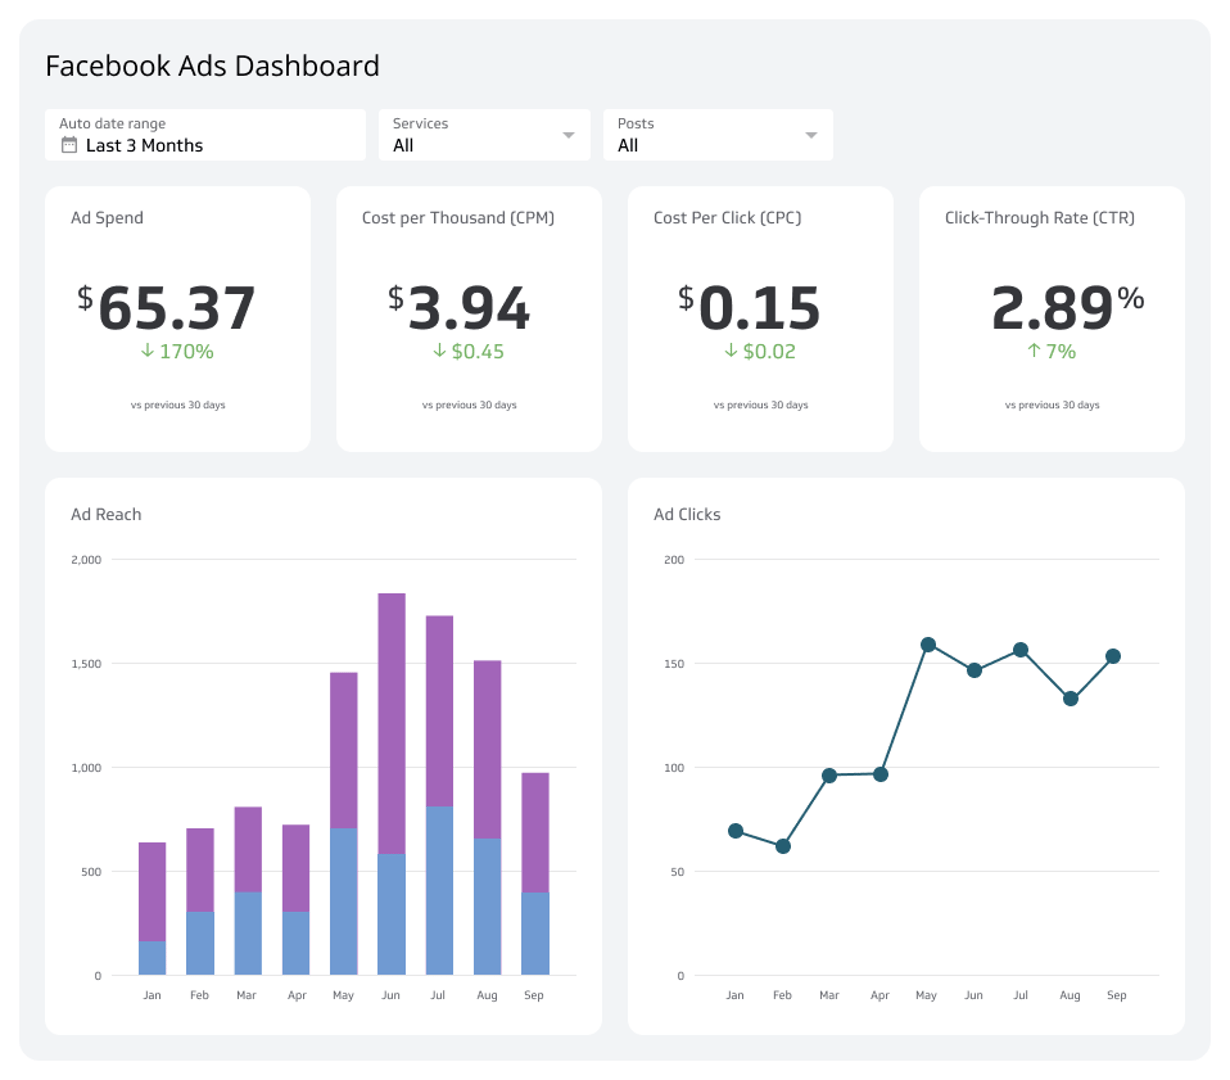 Related Dashboard Examples - Facebook Ads Dashboard